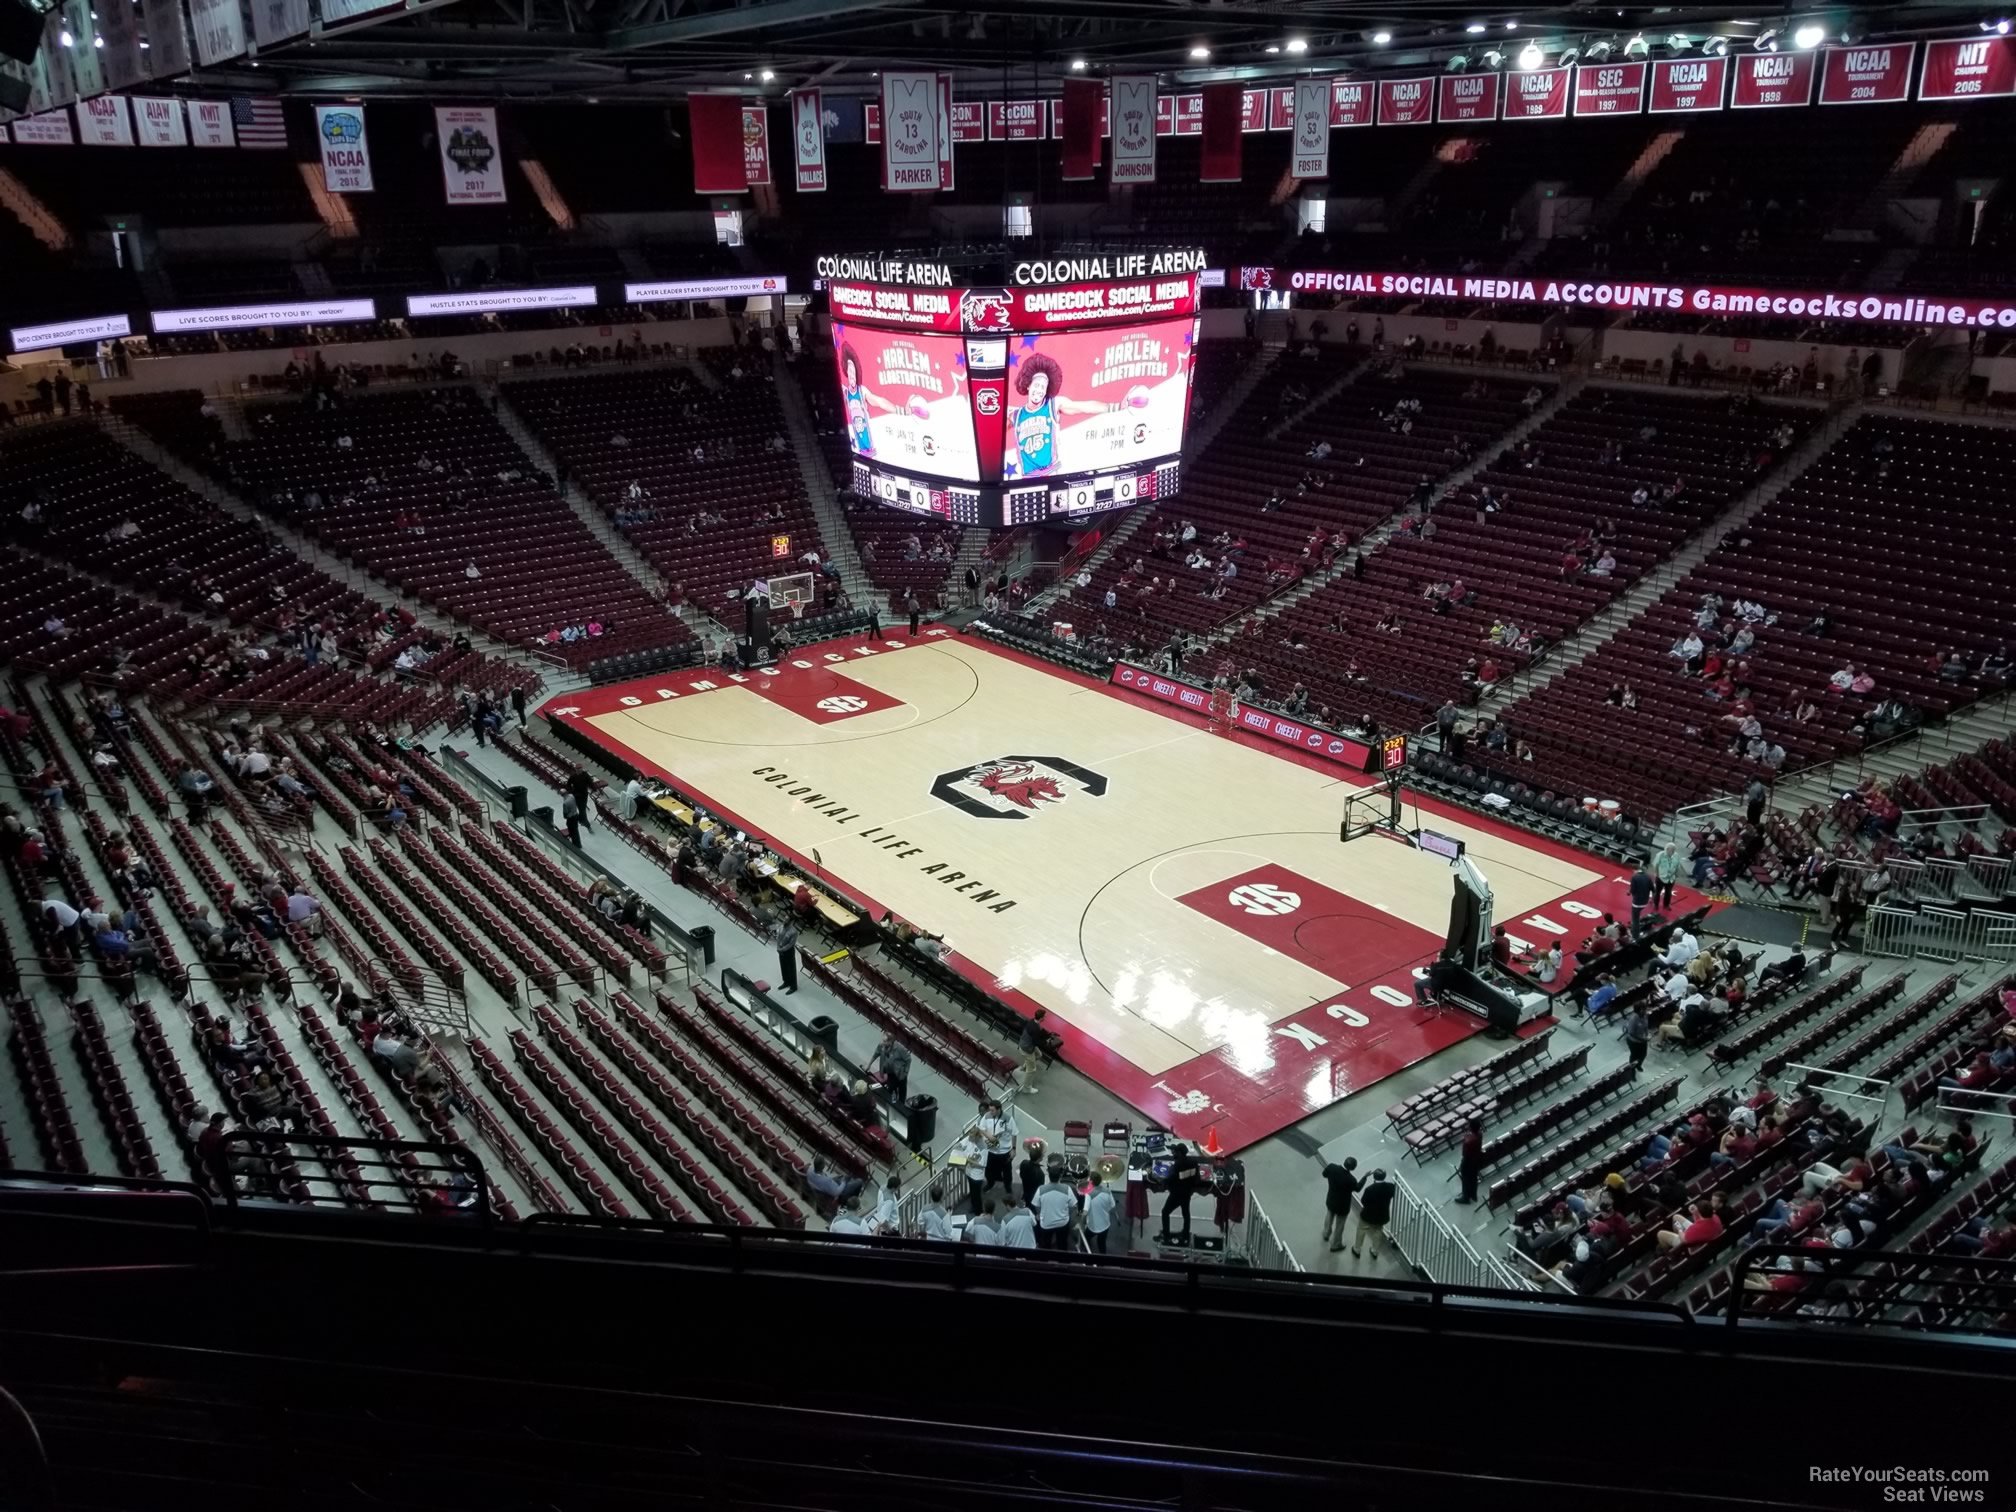 section 218, row 7 seat view  for basketball - colonial life arena